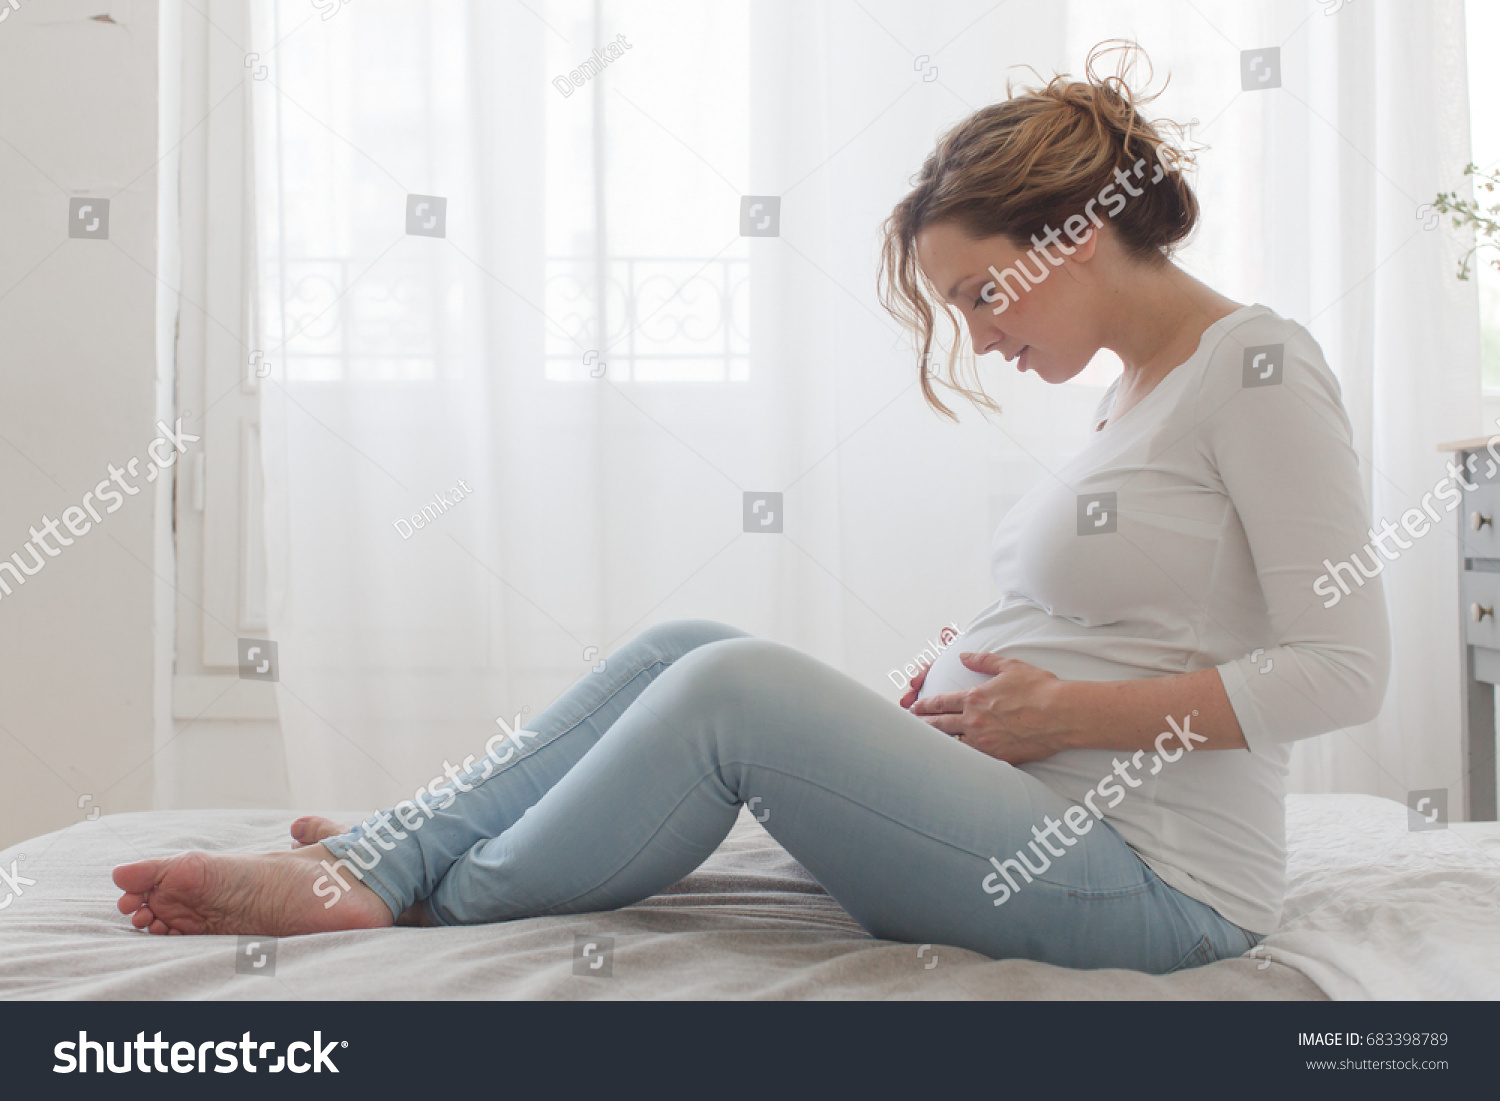 Pregnant woman sitting on bed looks at the belly #683398789